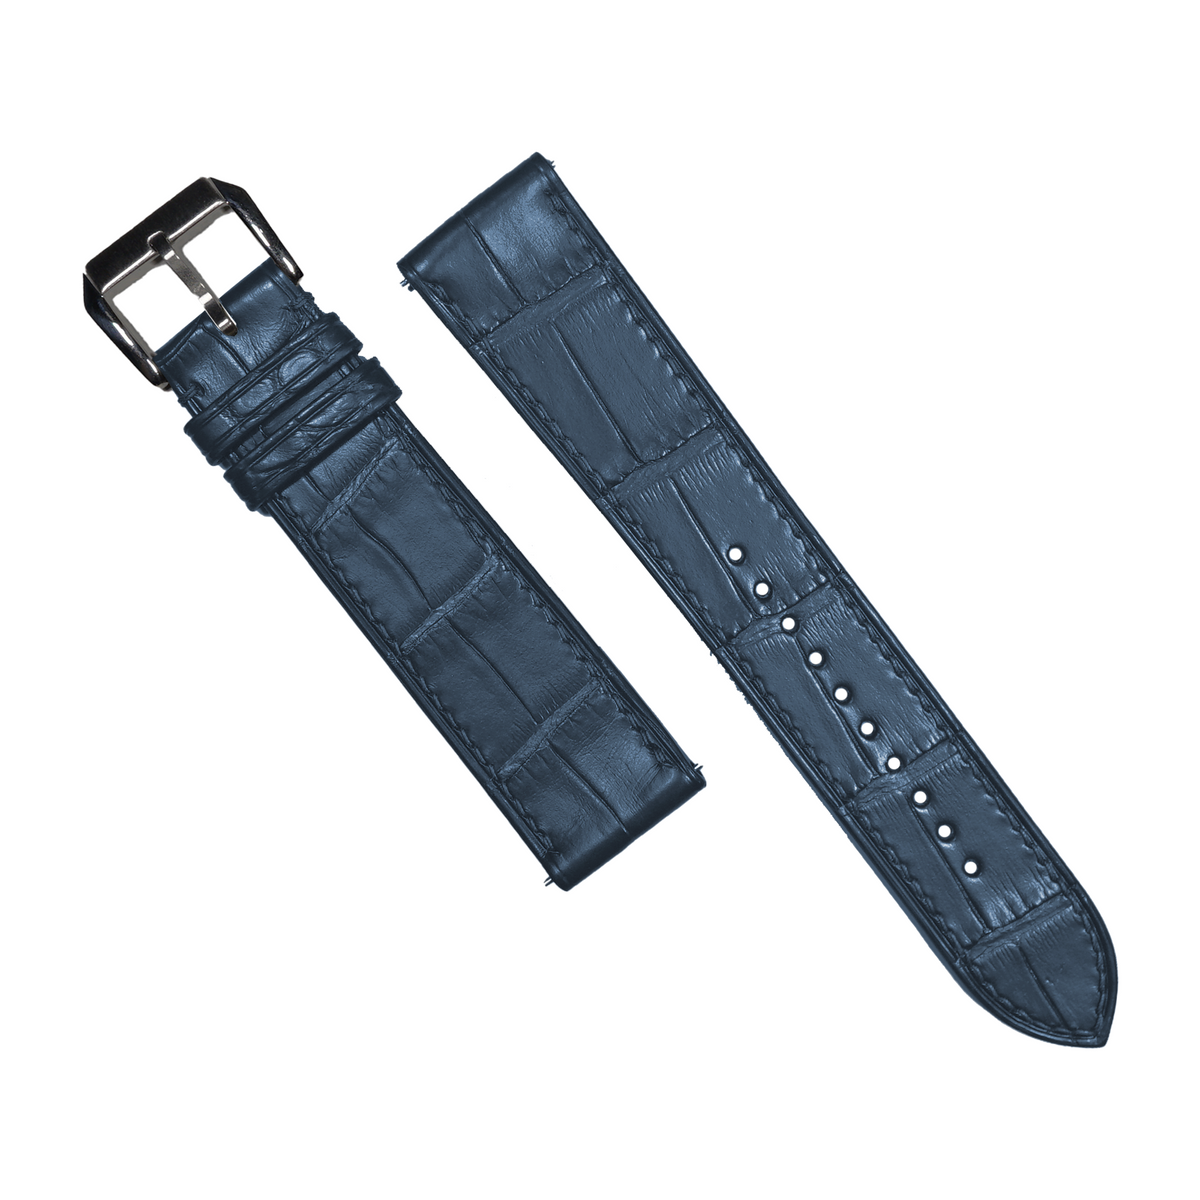 Alligator Leather Watch Strap in Marine (Non-Glossy) - Nomad Watch Works SG